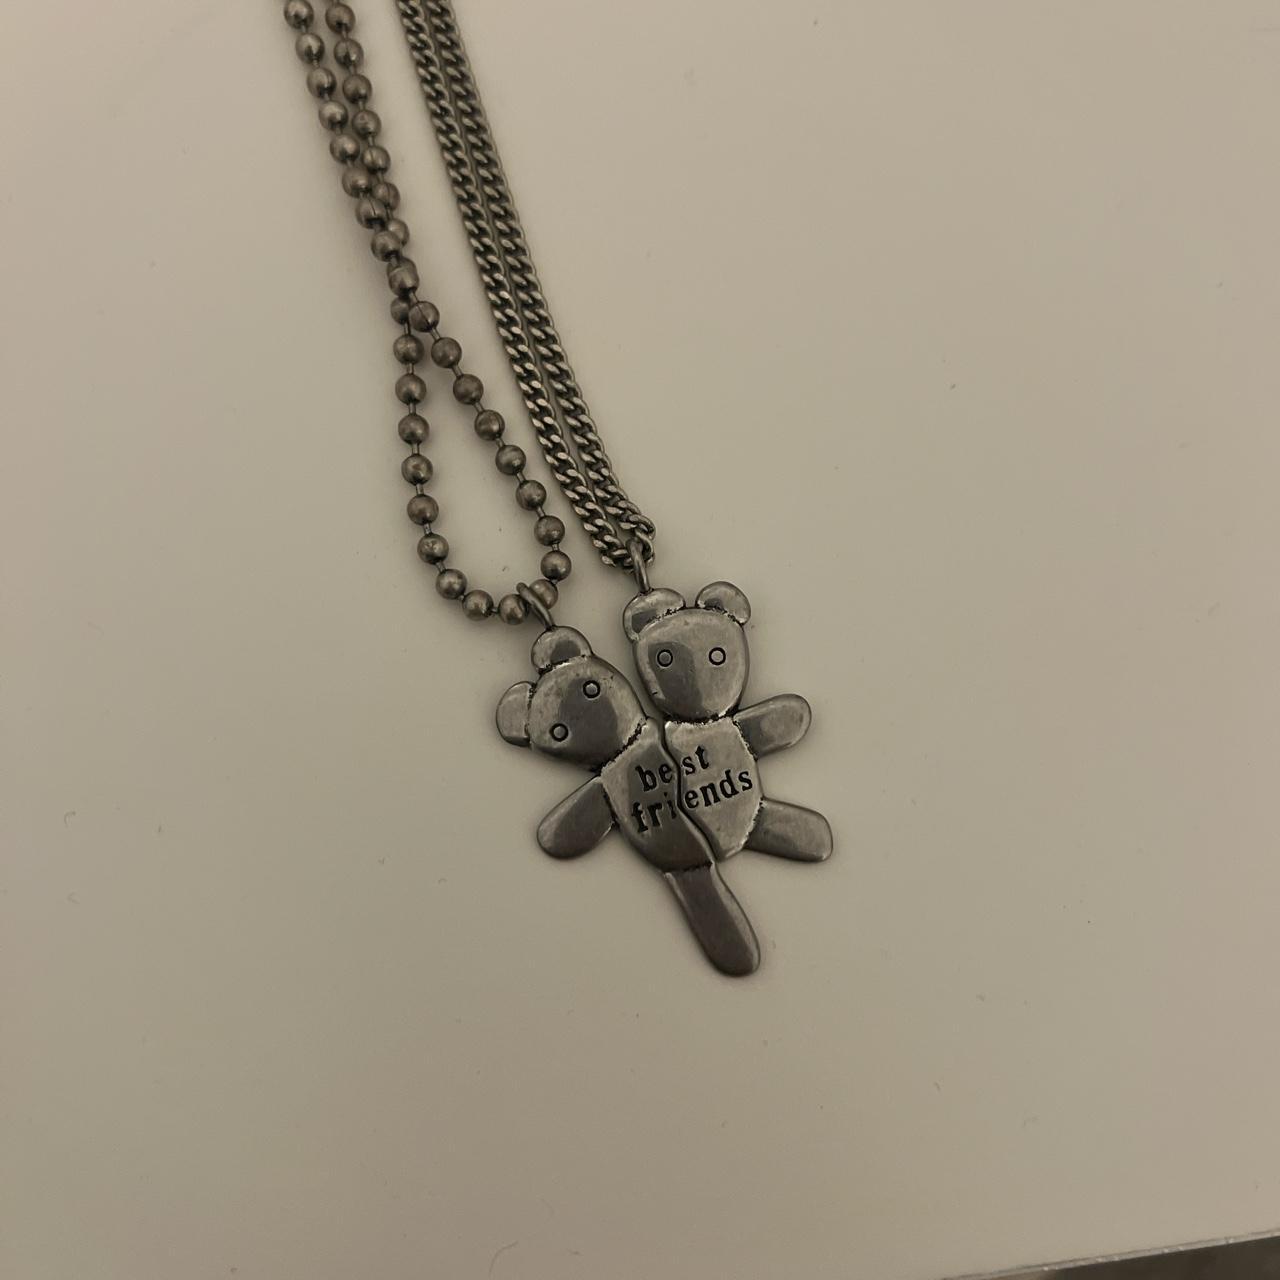 initial necklace or a matching heaven by marc jacobs chains idc!!!!! #... |  TikTok